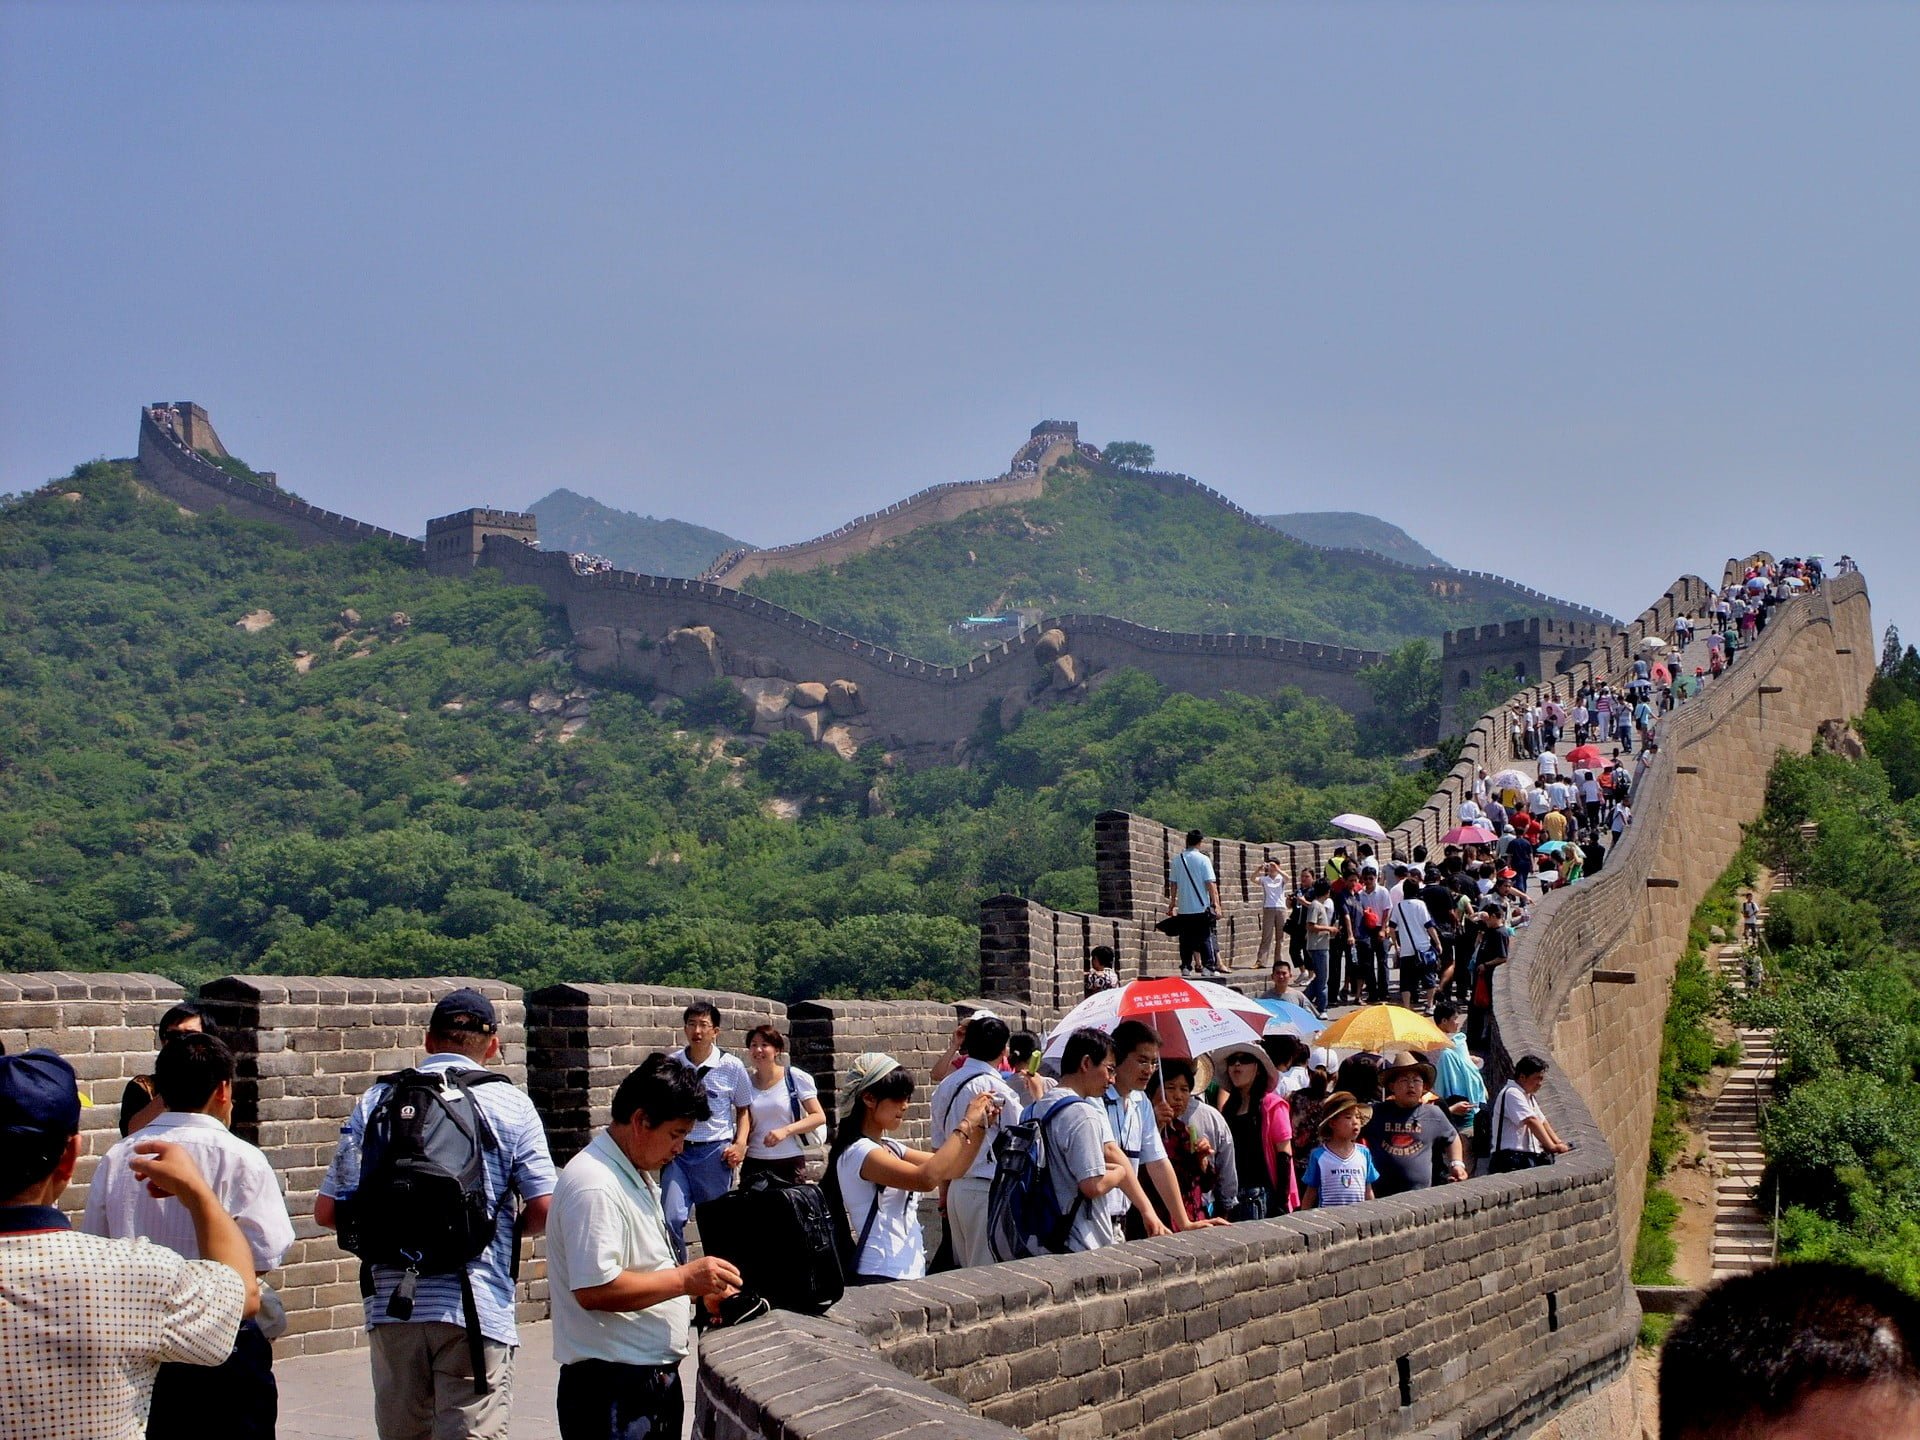 The Great Wall picture